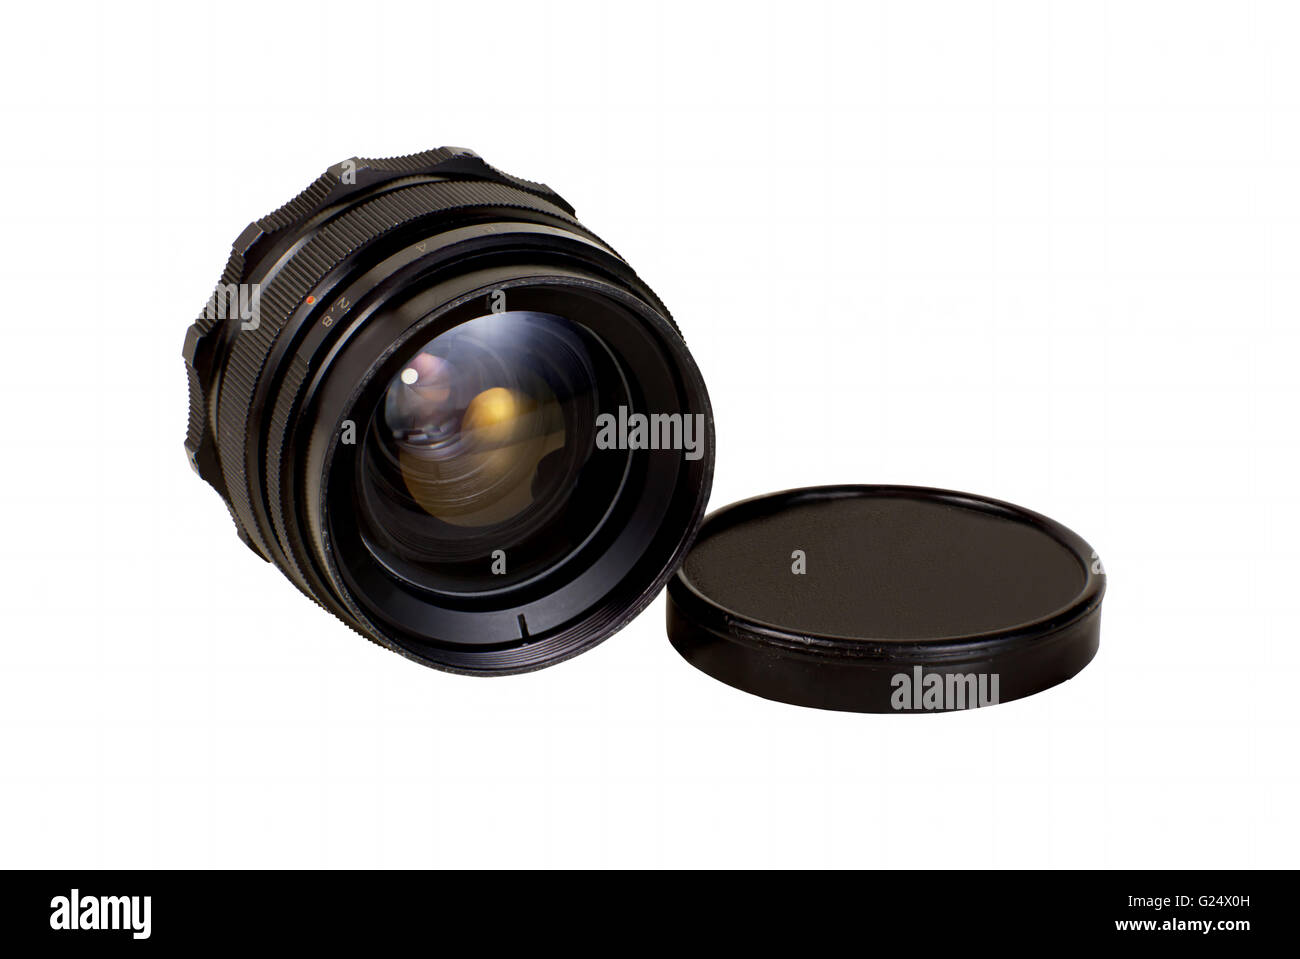 An old manual focus control camera lens isolated on white background with clipping paths Stock Photo